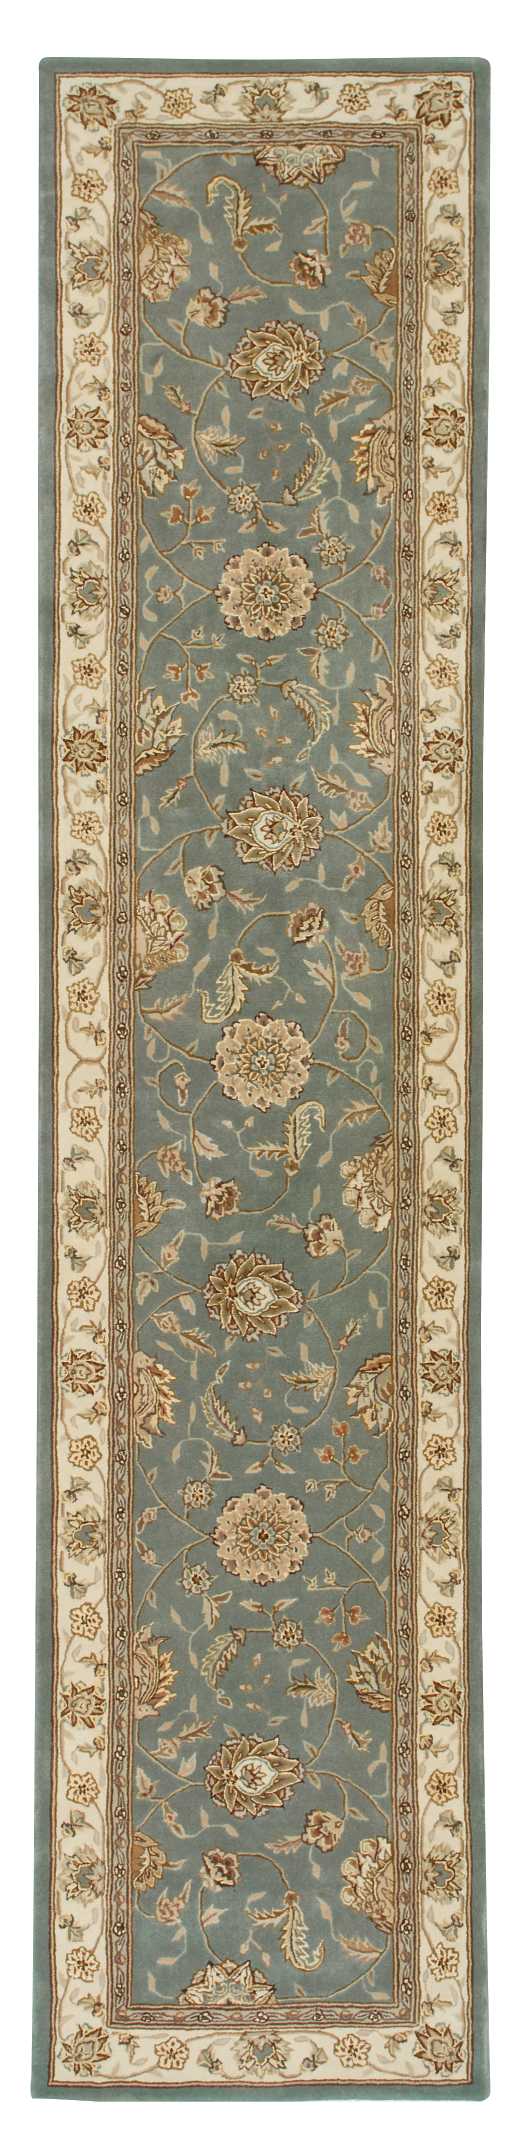 nourison 2000 hand tufted blue rug by nourison nsn 099446683779 5